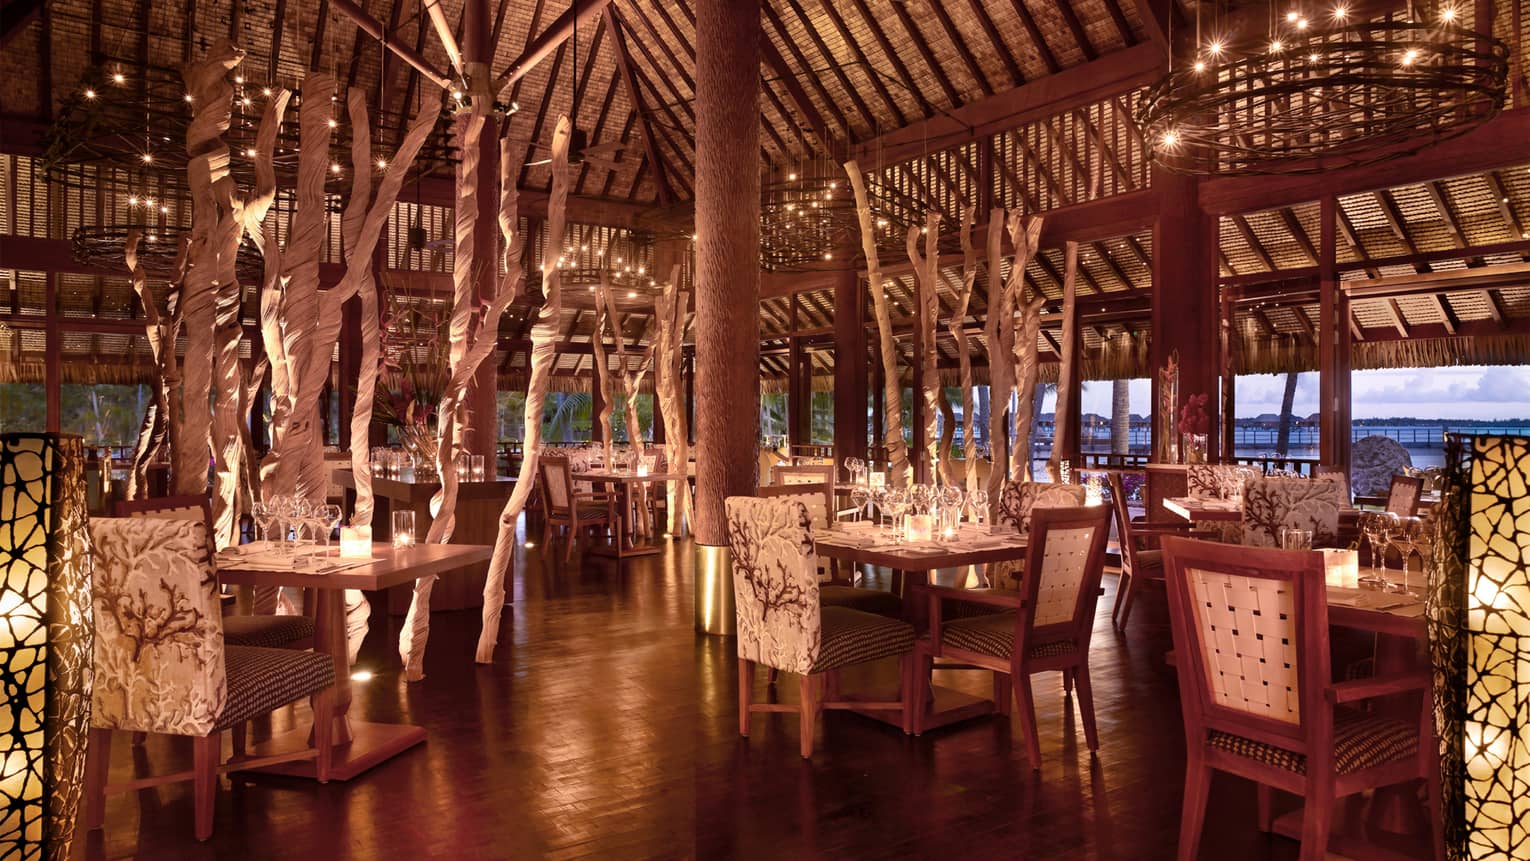 Elegant, candle-lit Arii Moana open-air dining room with plush chairs, decorative branches 